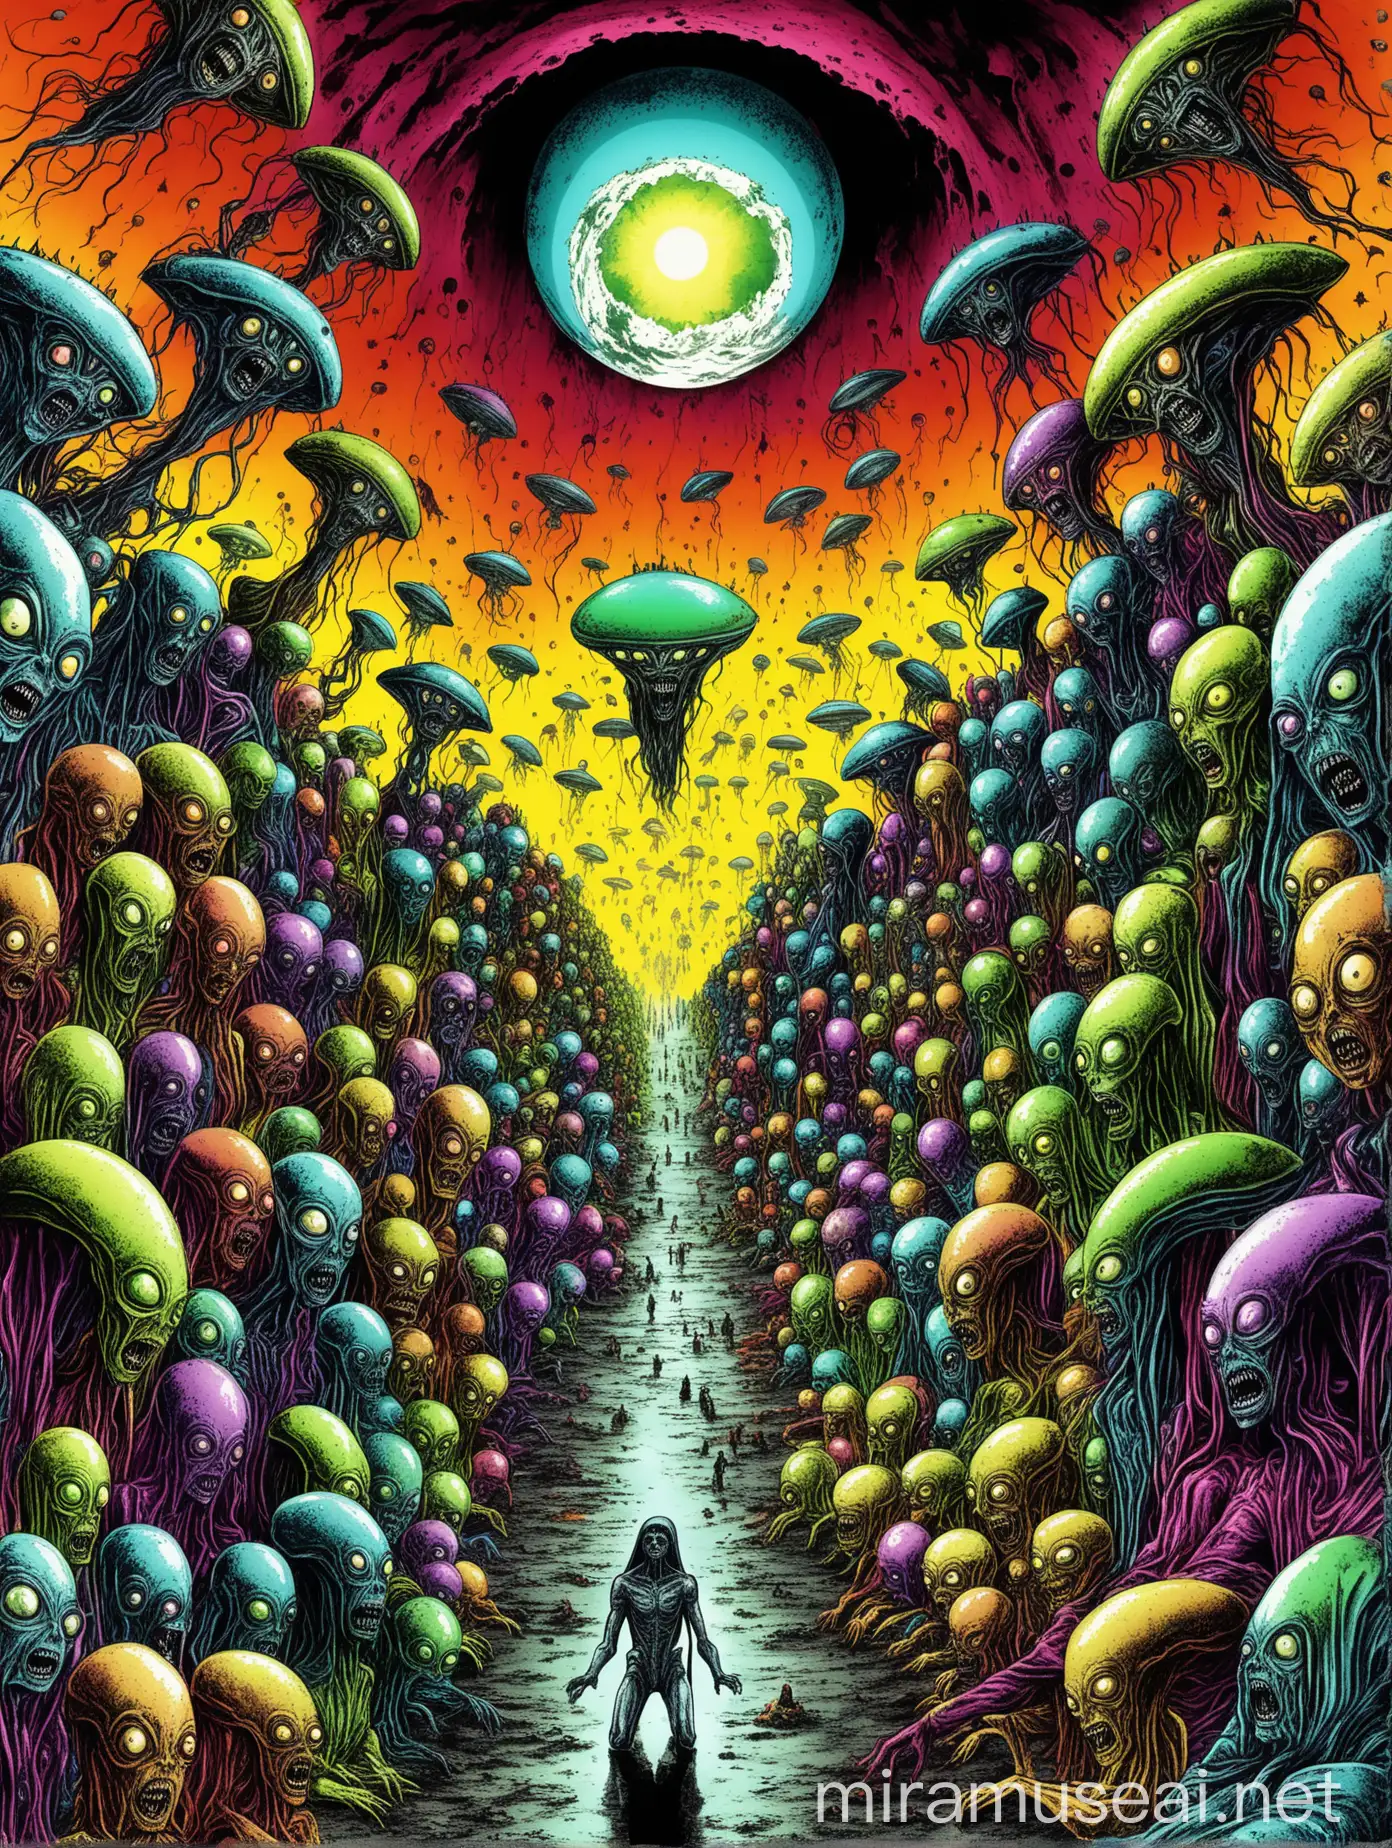 Alien Invasion Surrealism Colorful Surreal Scene Inspired by Salvador Dal in Manga Style